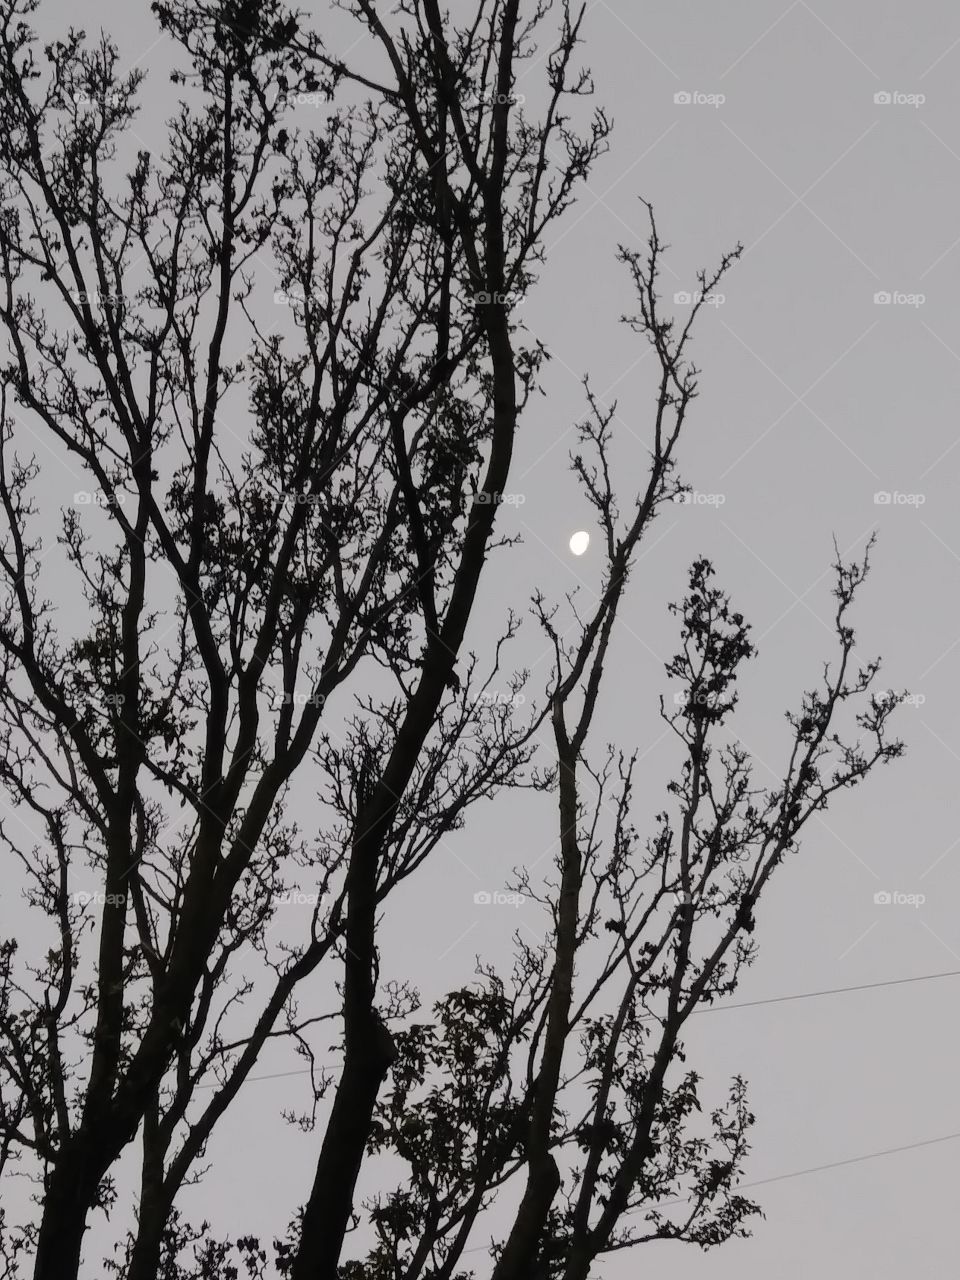 trees with morning moon